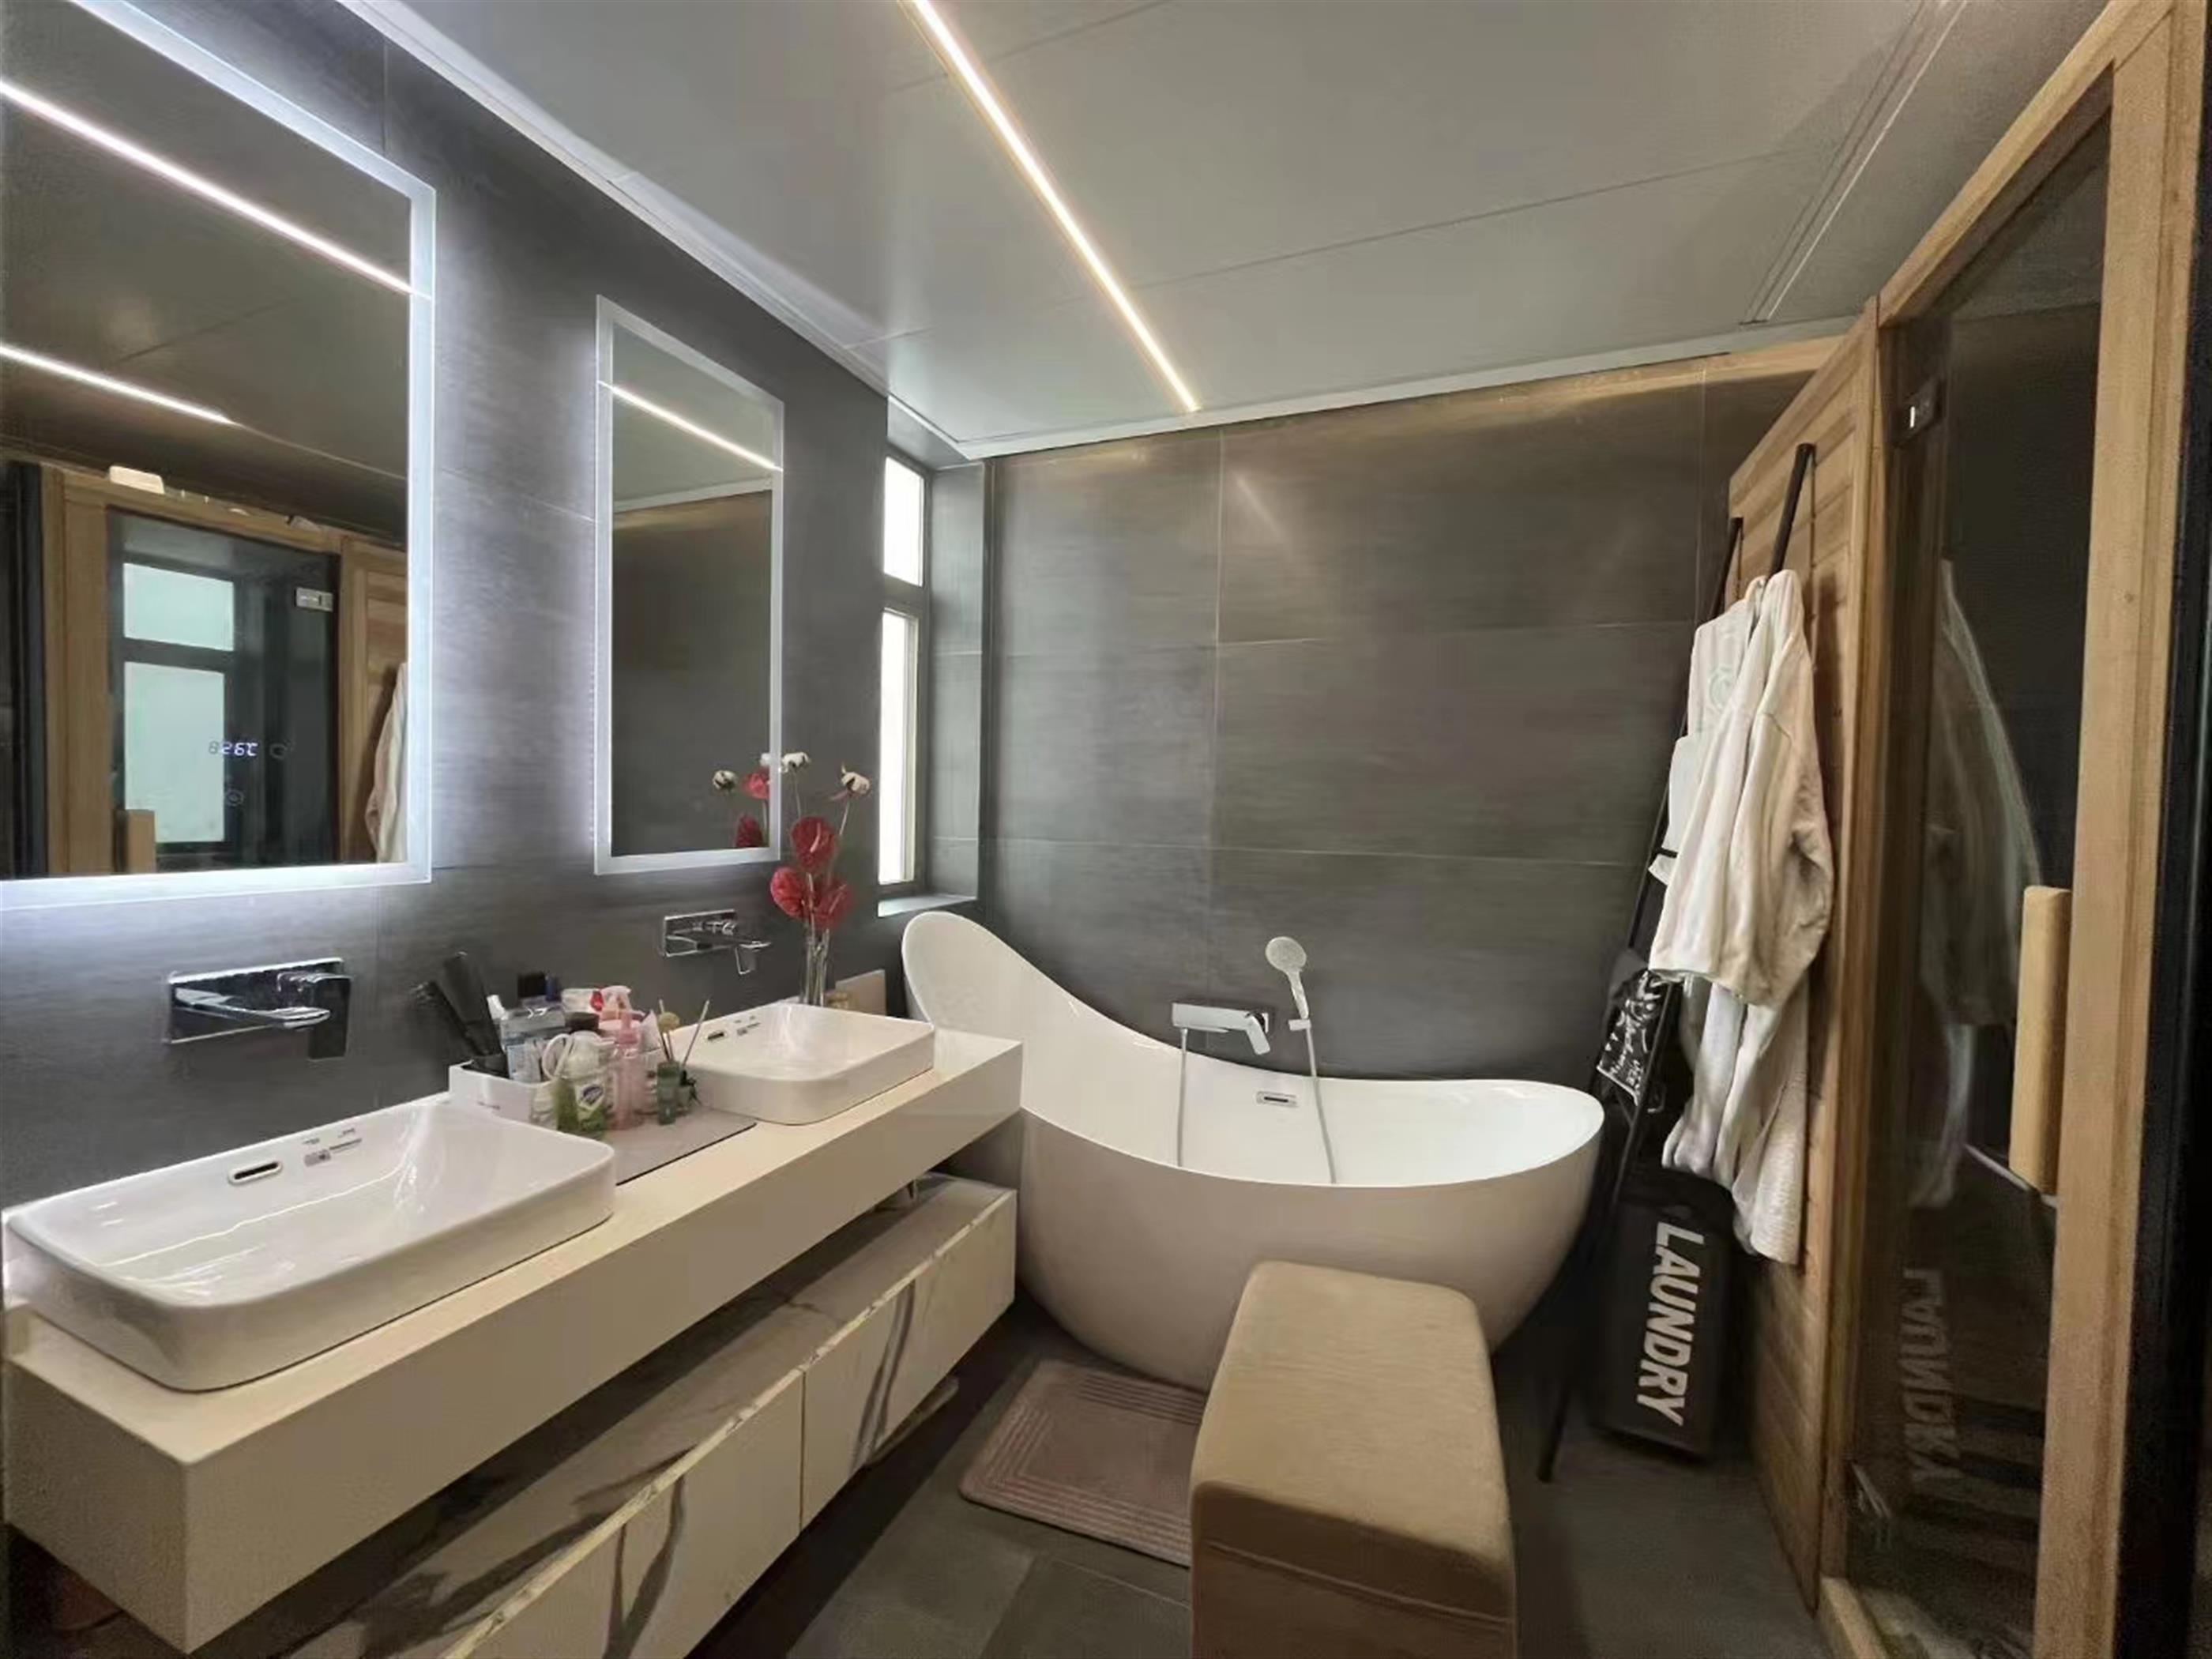 Comfy Bathtub Classic Spacious Chic 3BR Apartment for Rent in Shanghai’s Jing’an Temple Neighborhood